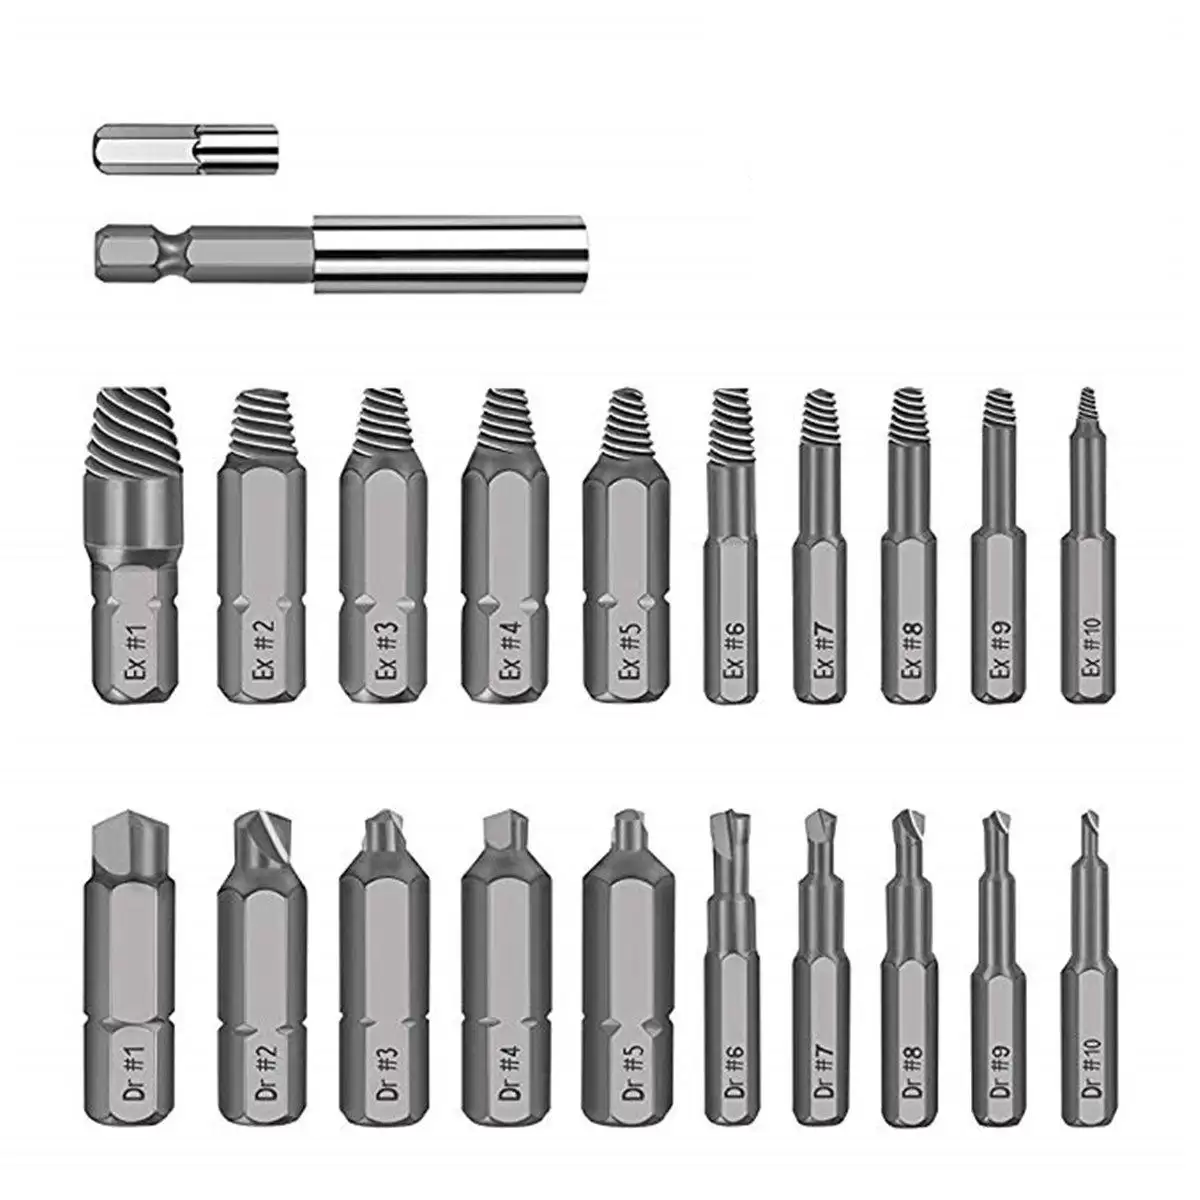 Order In Just $7.99 Drillpro 22pcs Damaged Screw Extractor Set For Broken Screw With This Coupon At Banggood